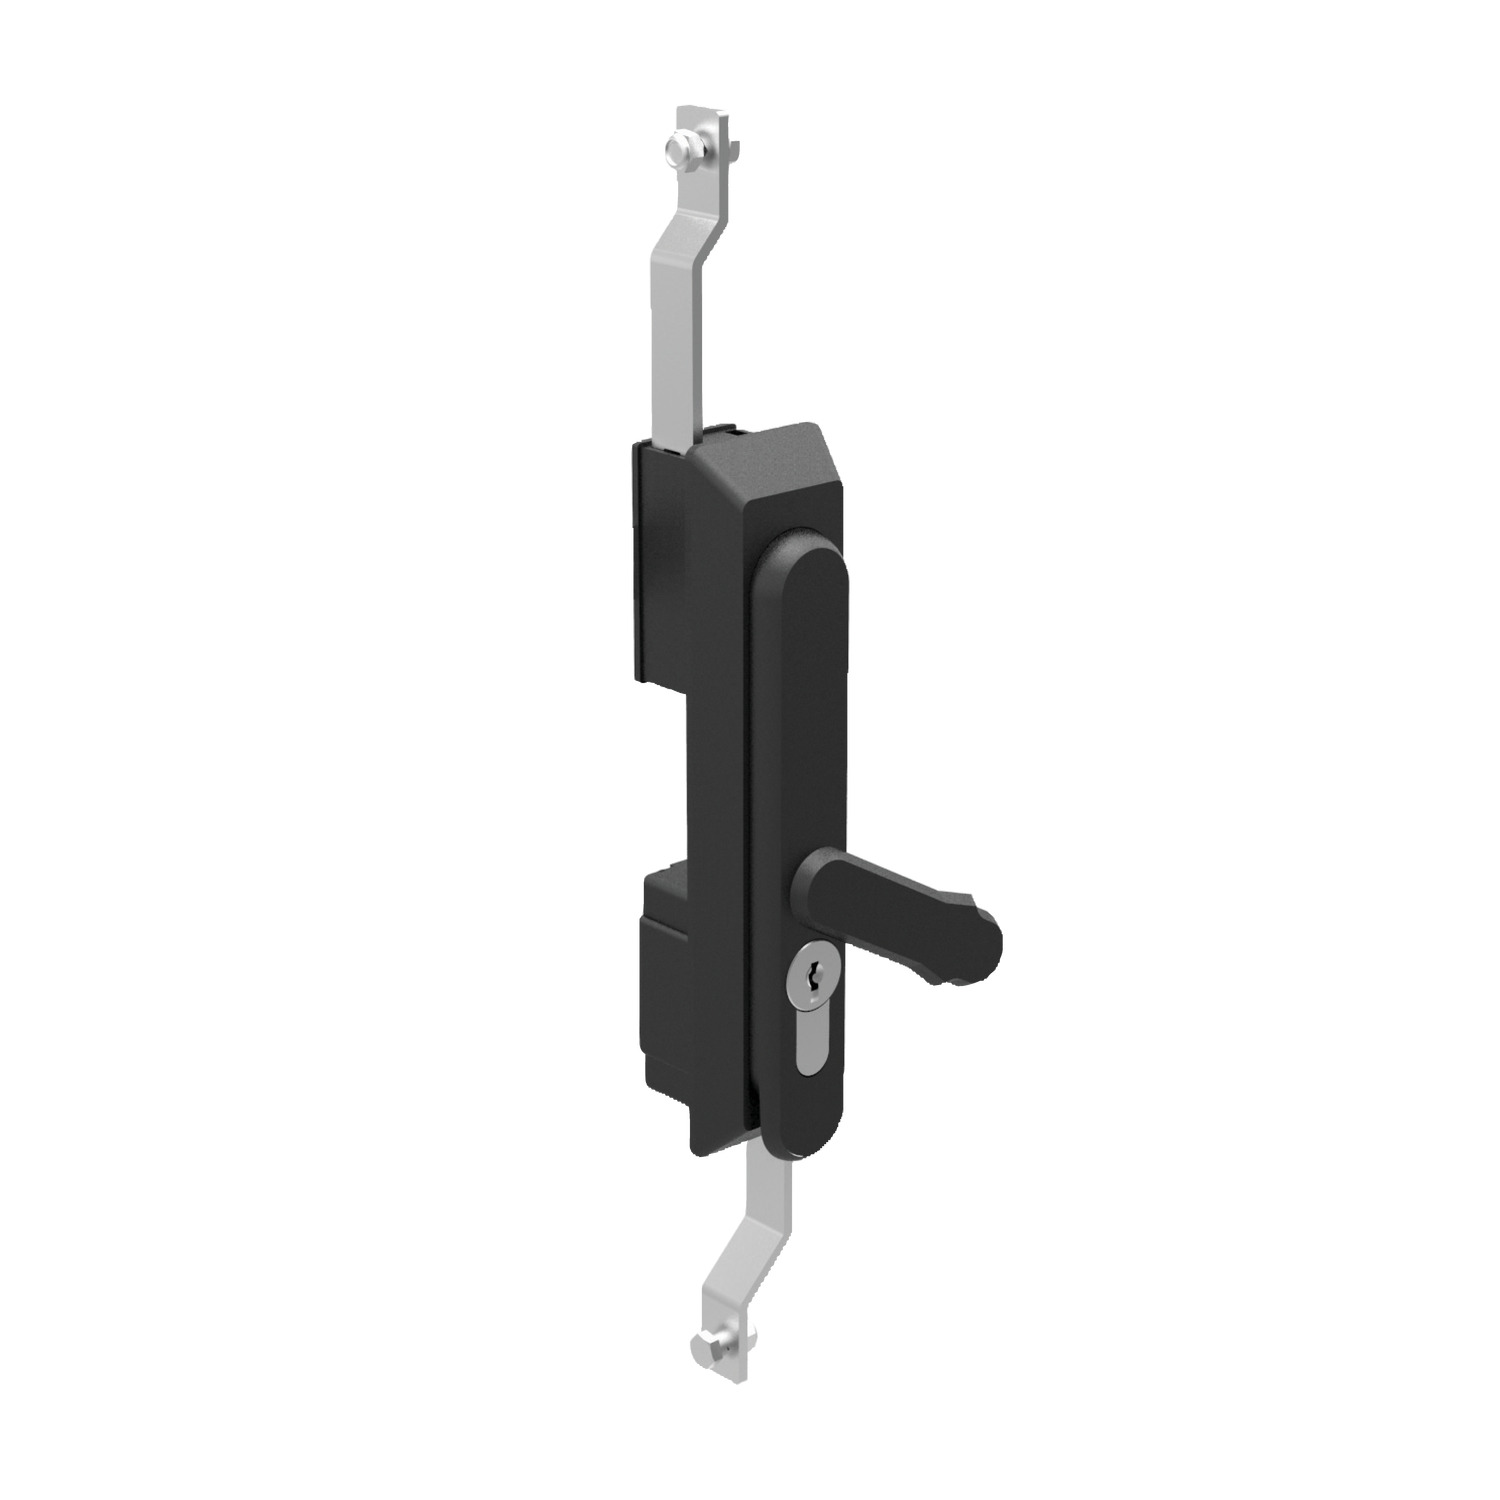 Product B2091, Swing Handles - with Rod Control 40mm euro cylinder lock - dust cover - polyamide / 